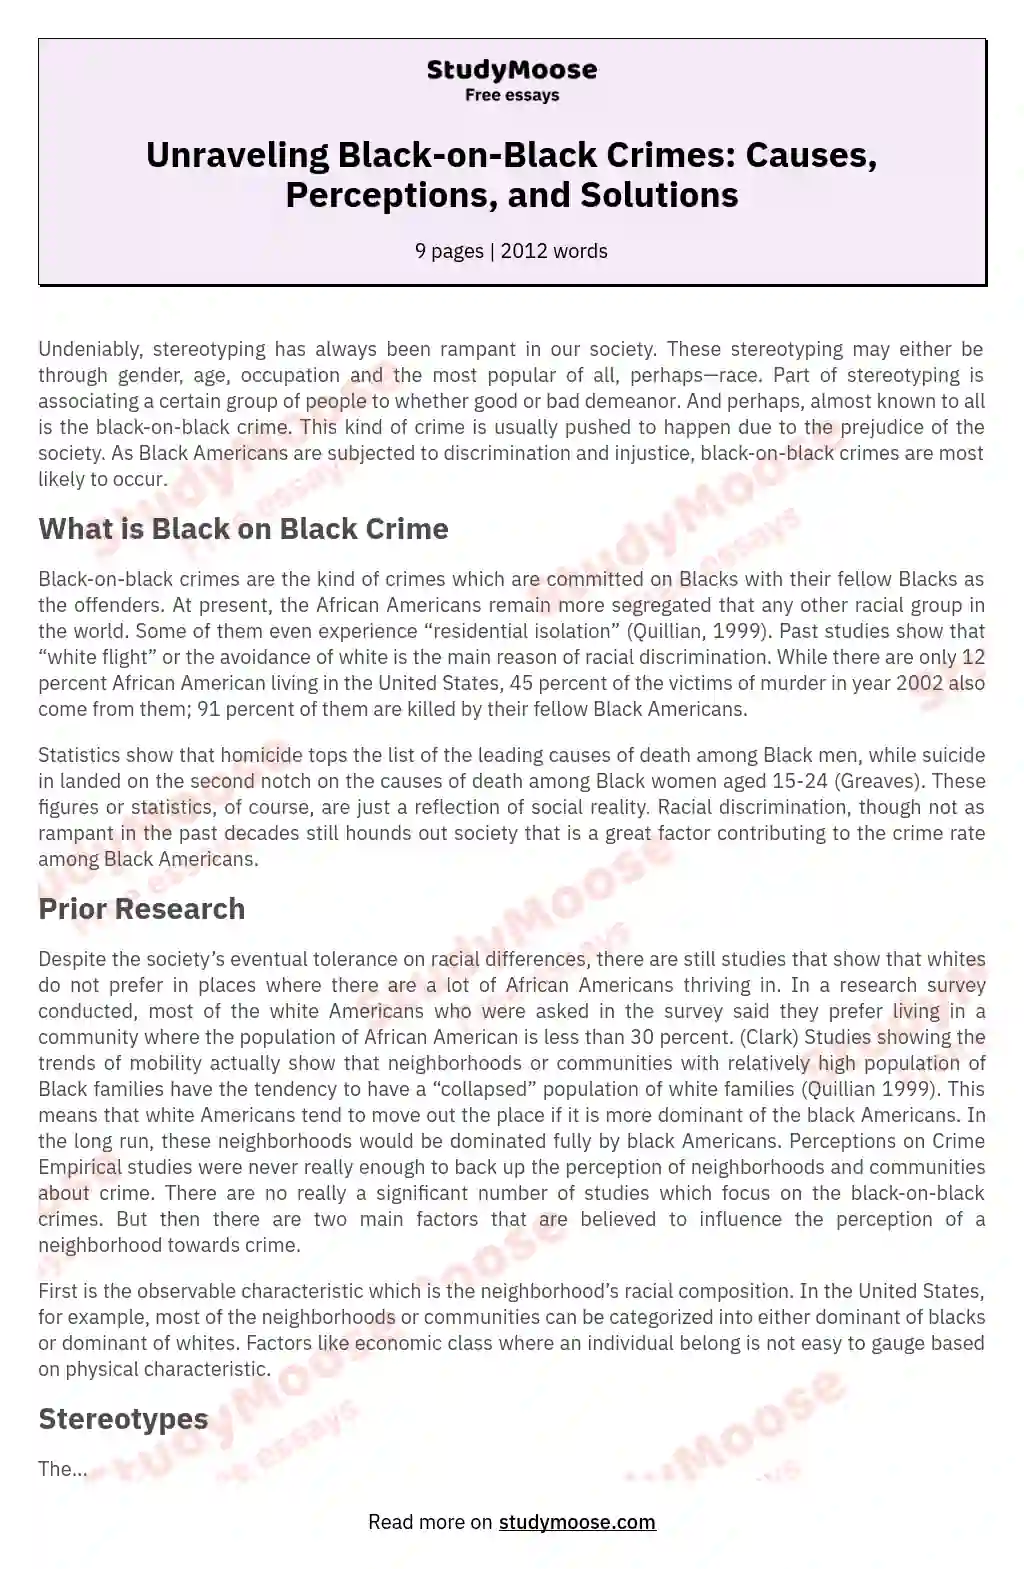 Unraveling Black-on-Black Crimes: Causes, Perceptions, and Solutions essay